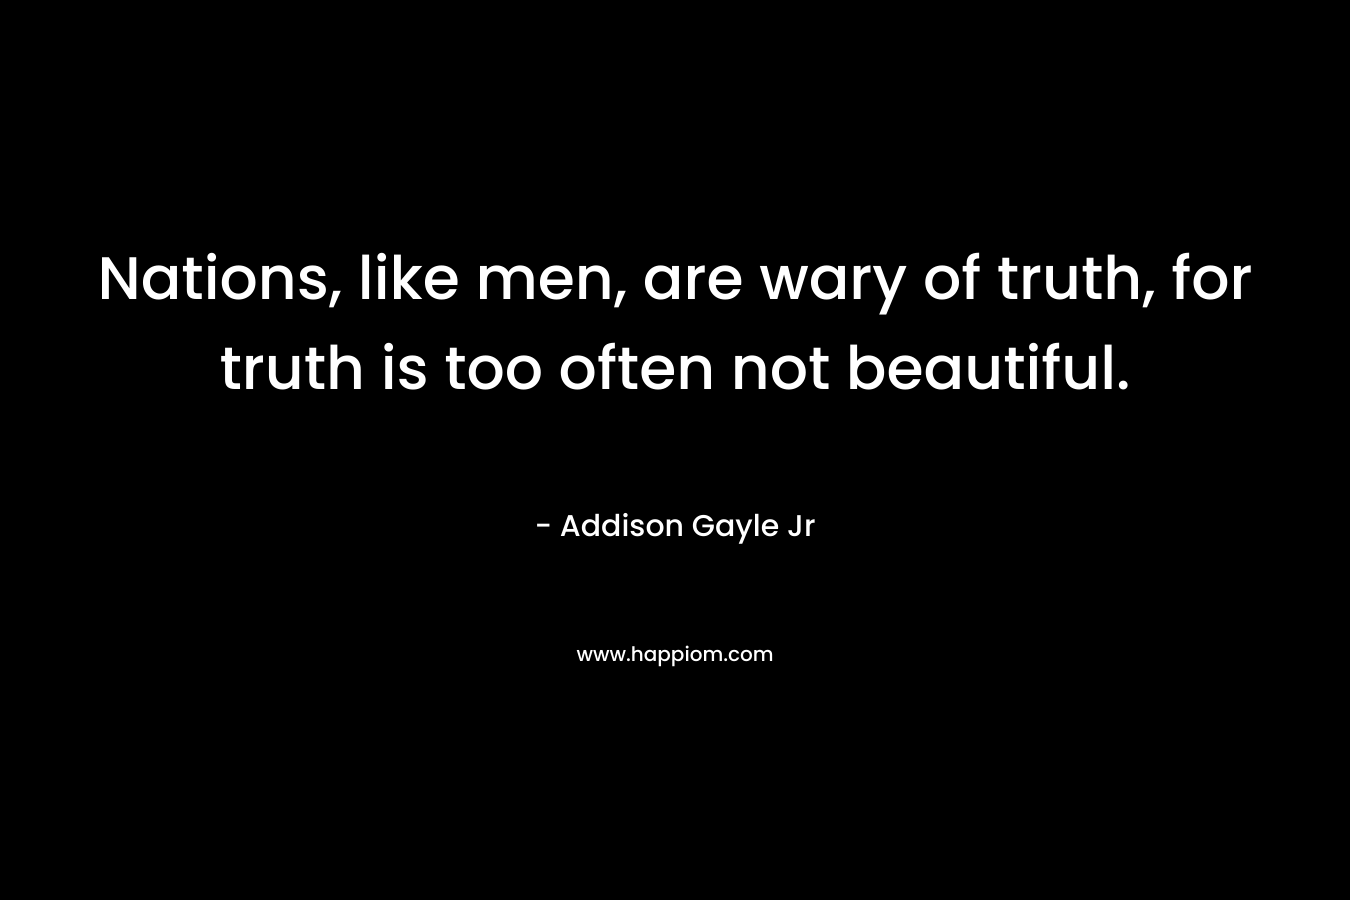 Nations, like men, are wary of truth, for truth is too often not beautiful.